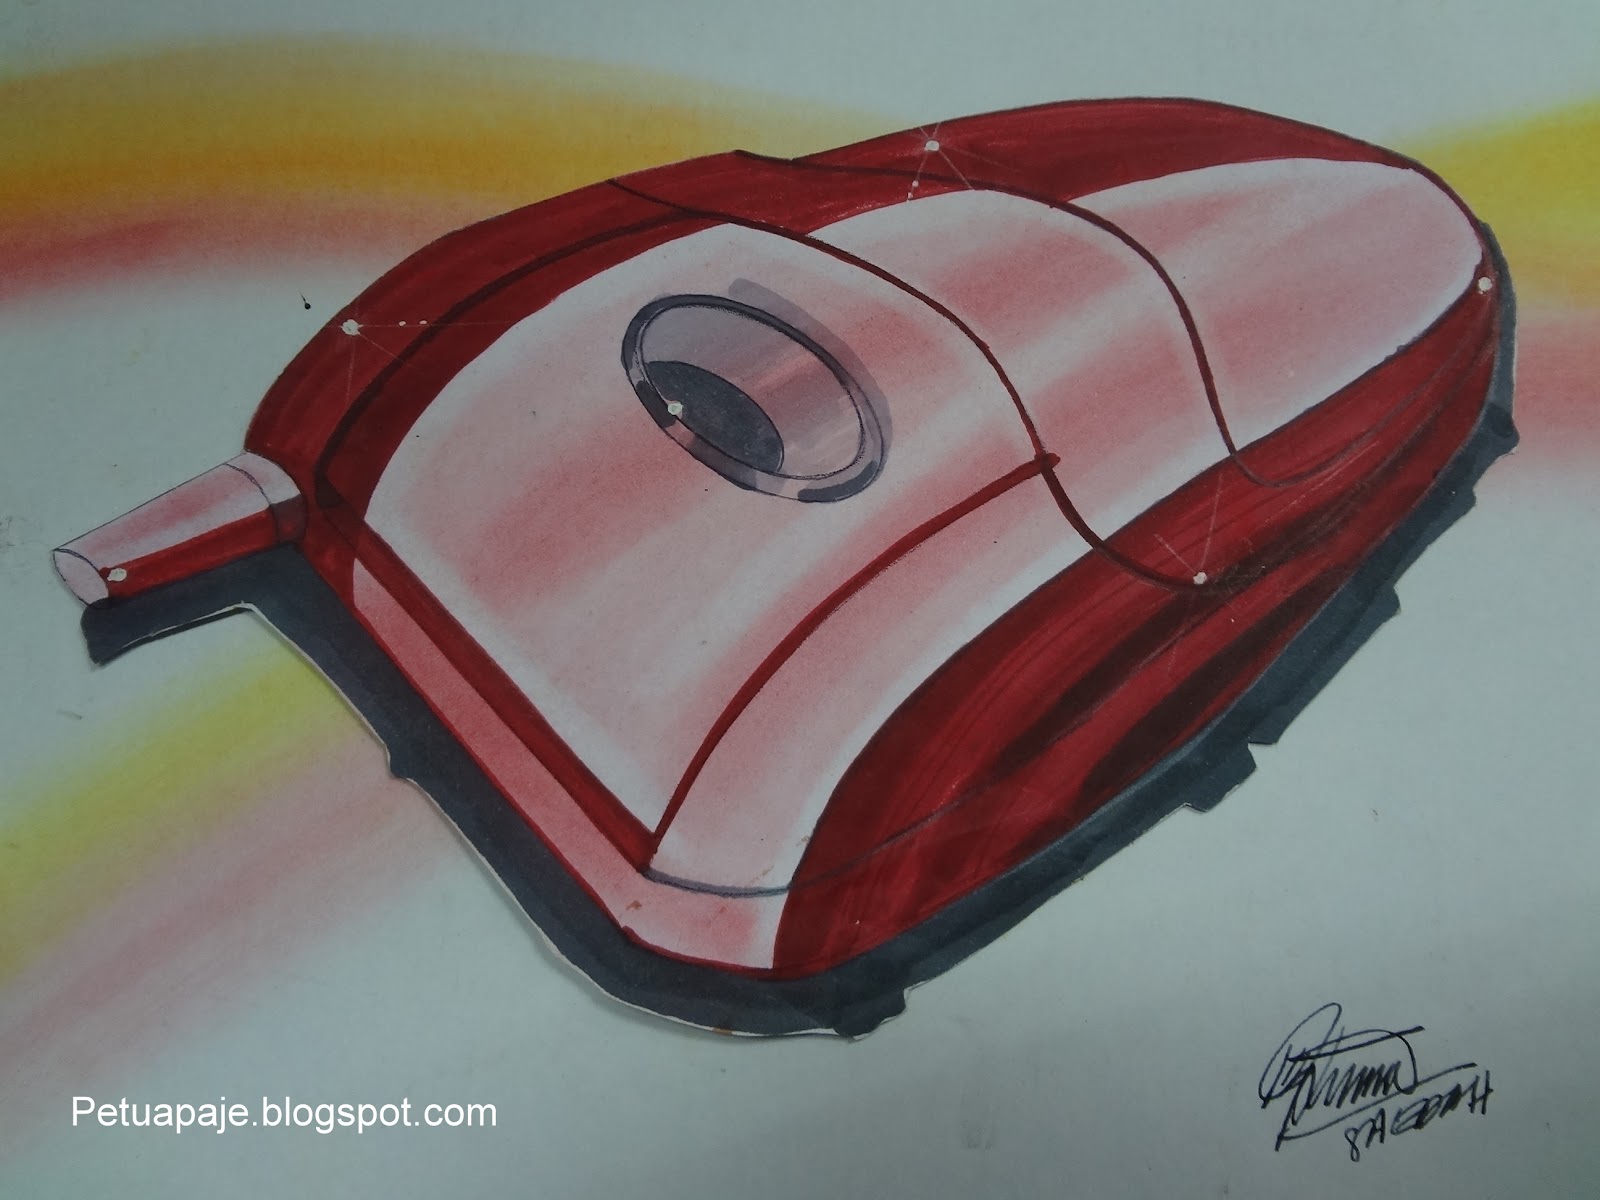 wallpaper tiga dimensi,red,automotive design,mouse,drawing,vehicle